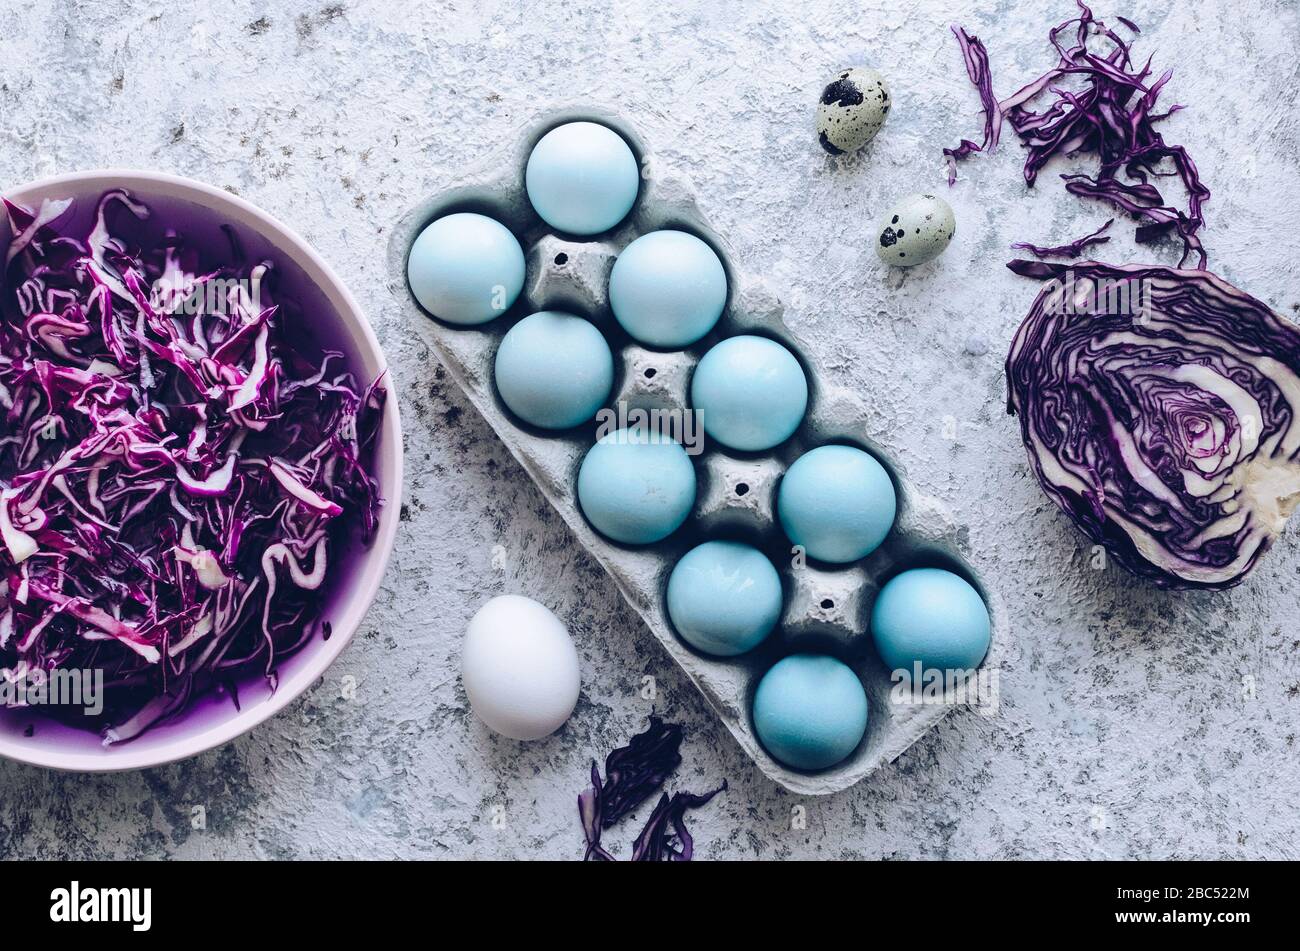 Dyed Blue Easter Eggs Painted With Natural Dye Red Cabbage On Grey Concrete Background Process Of Dyeing Eggs With Natural Paints For Easter Natural Stock Photo Alamy,Johnny Cakes Sopranos Actor